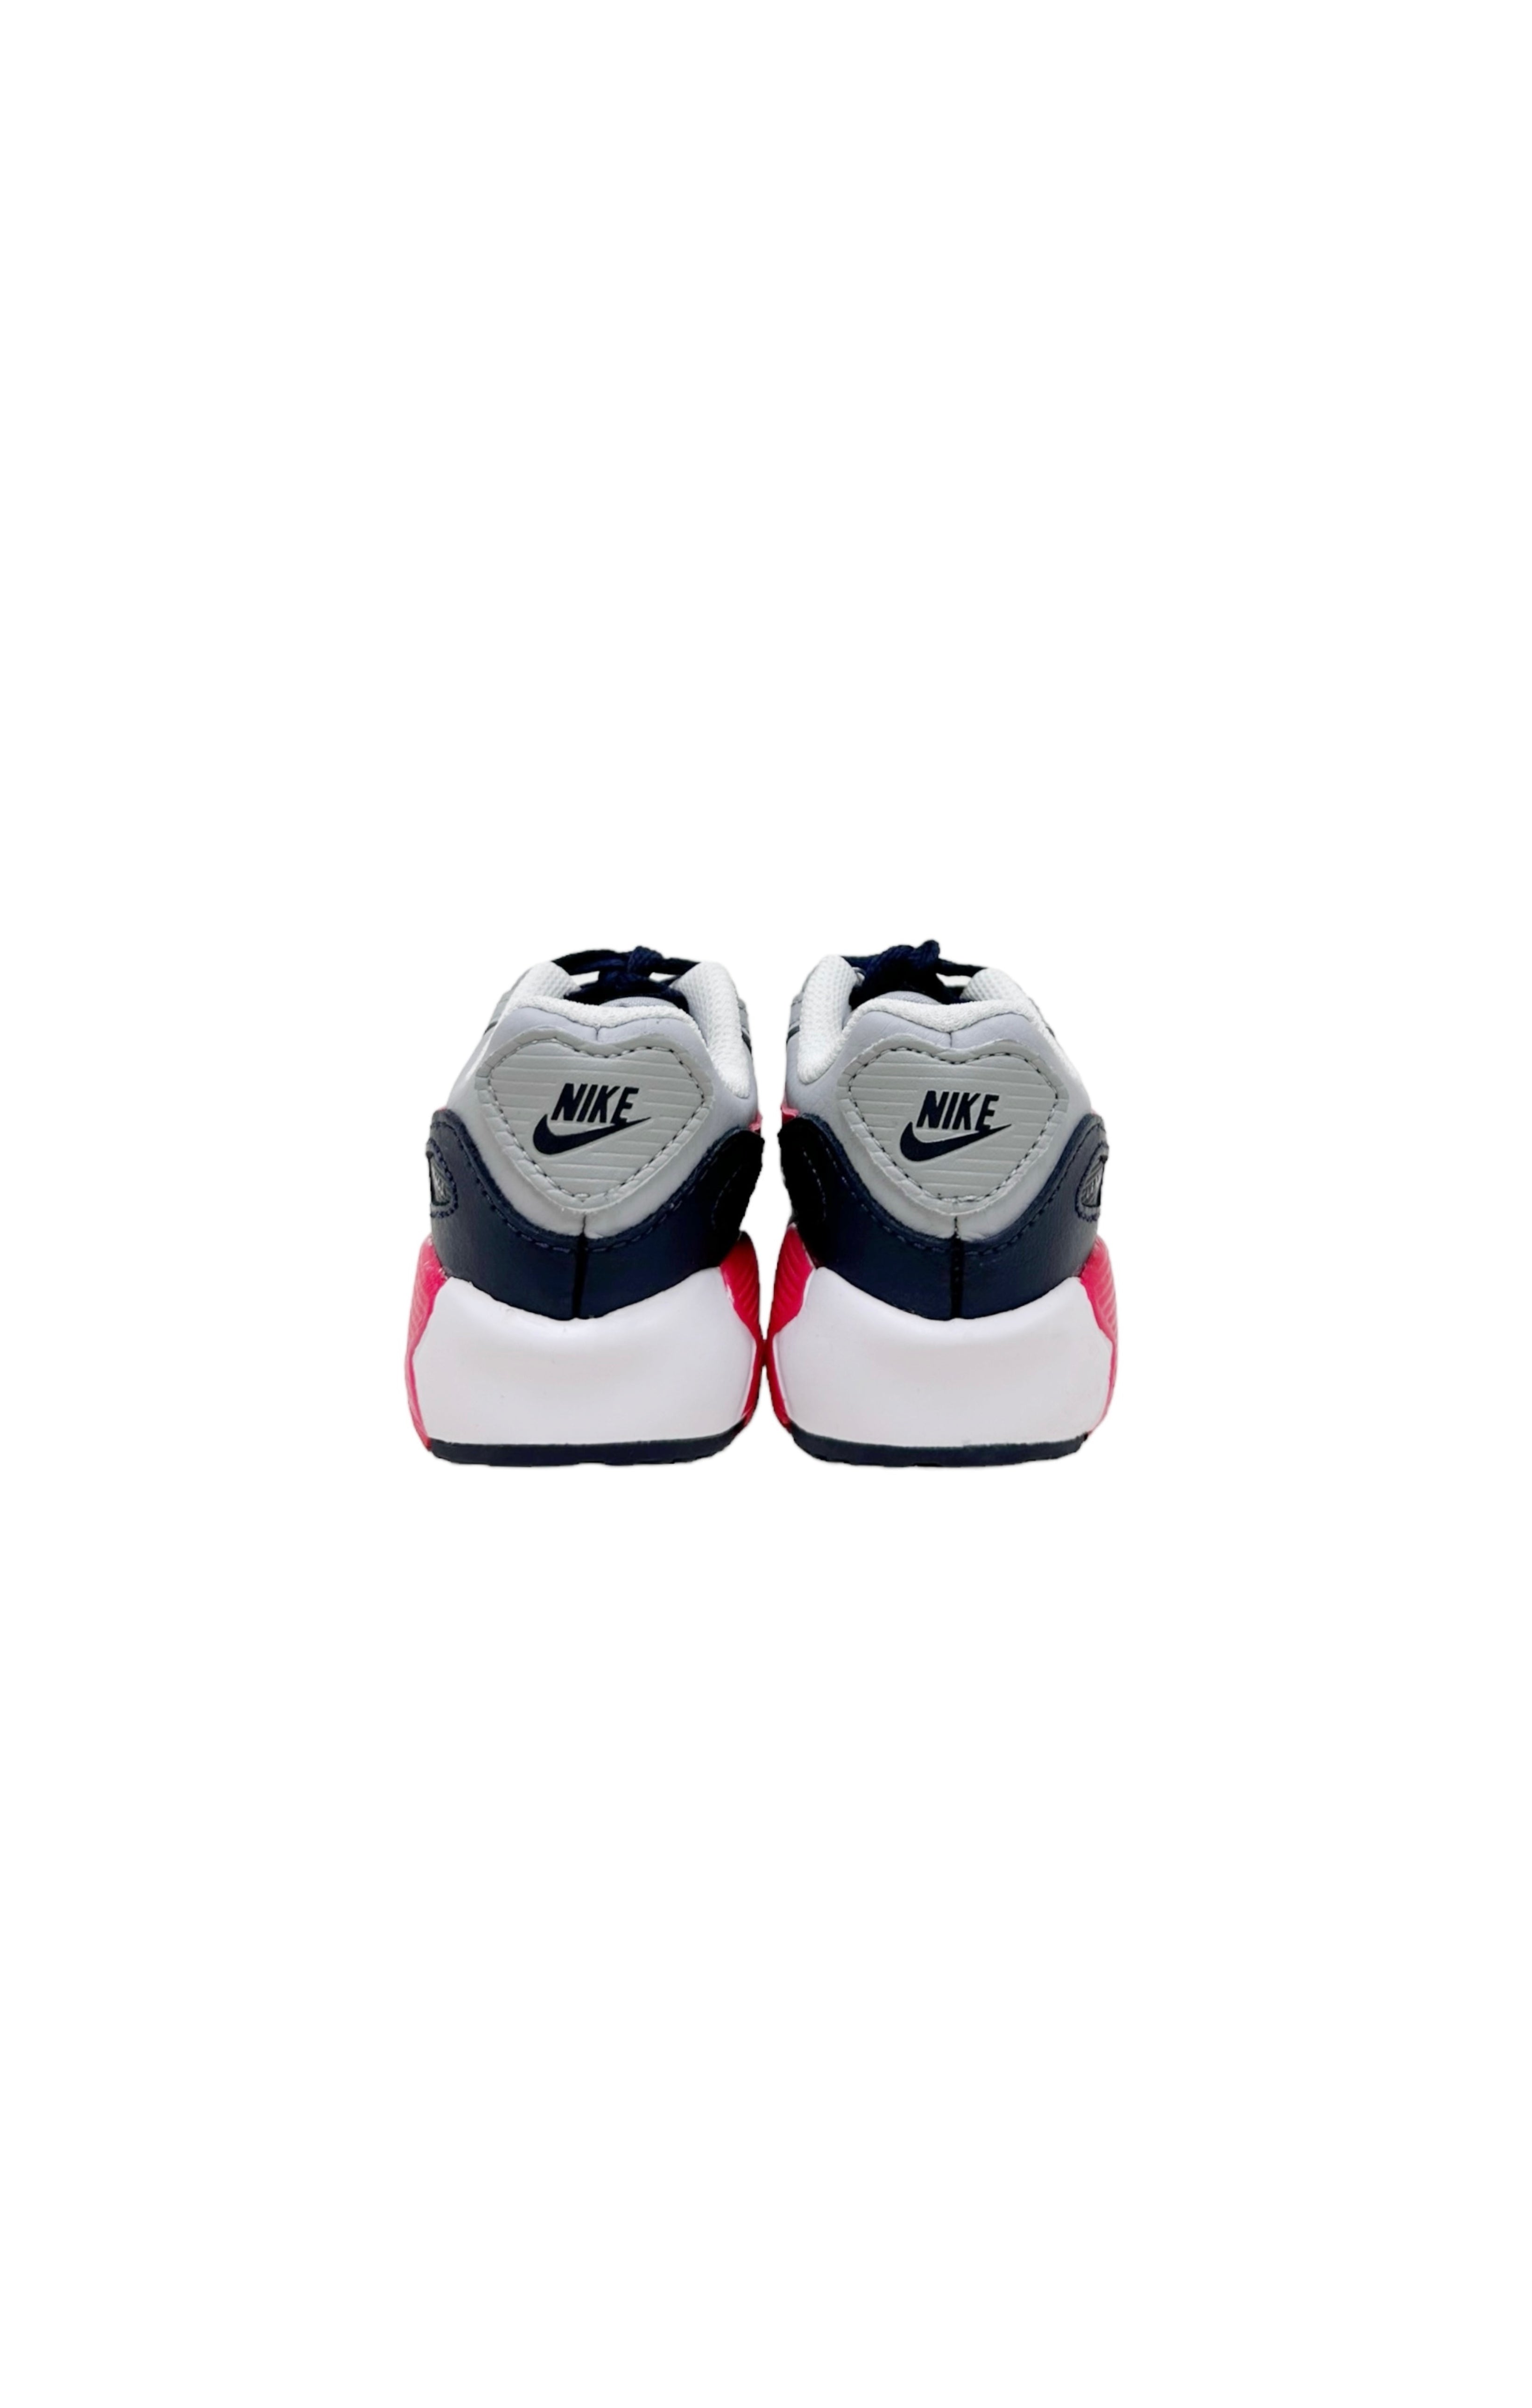 NIKE (RARE) Sneakers Size: Infant US 6C